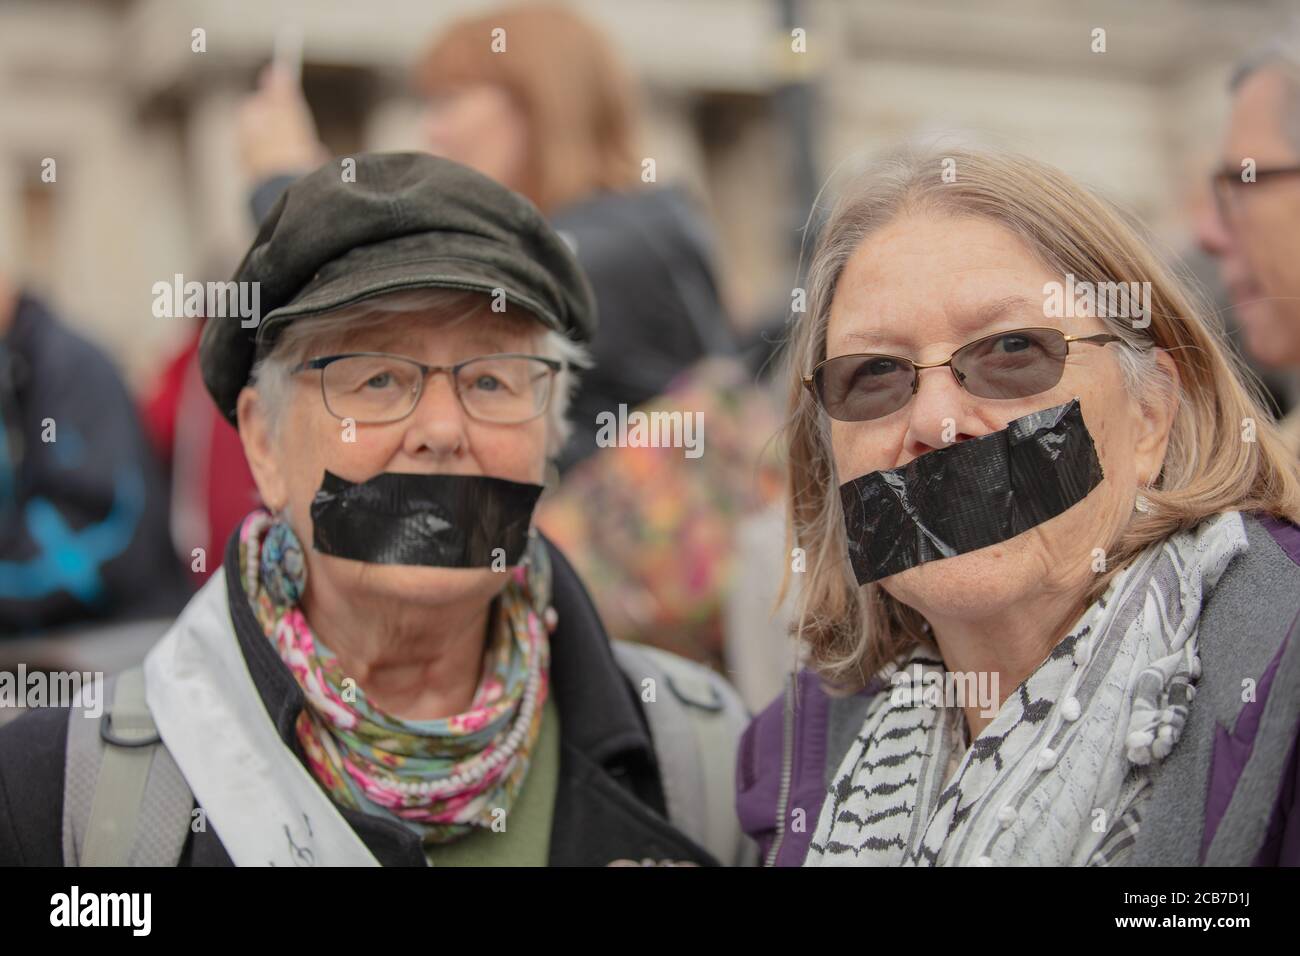 Two female members of the environmental group Extinction Rebellion seen in defiance of Section 14 Public Order Act gathering on Trafalgar Square. Stock Photo